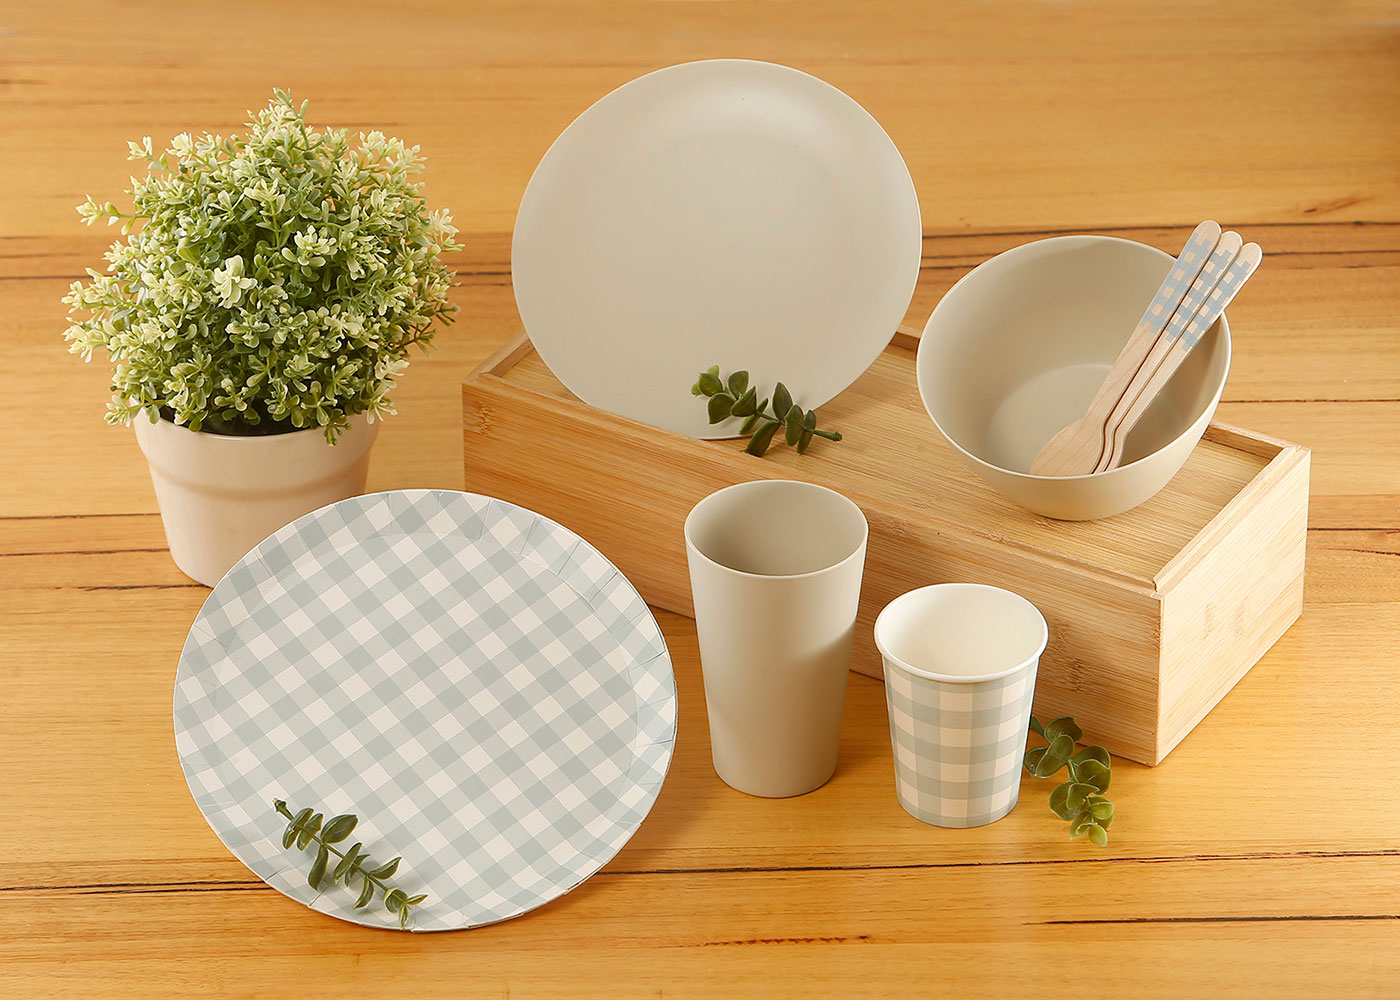 Coles new reusable and single-use tableware